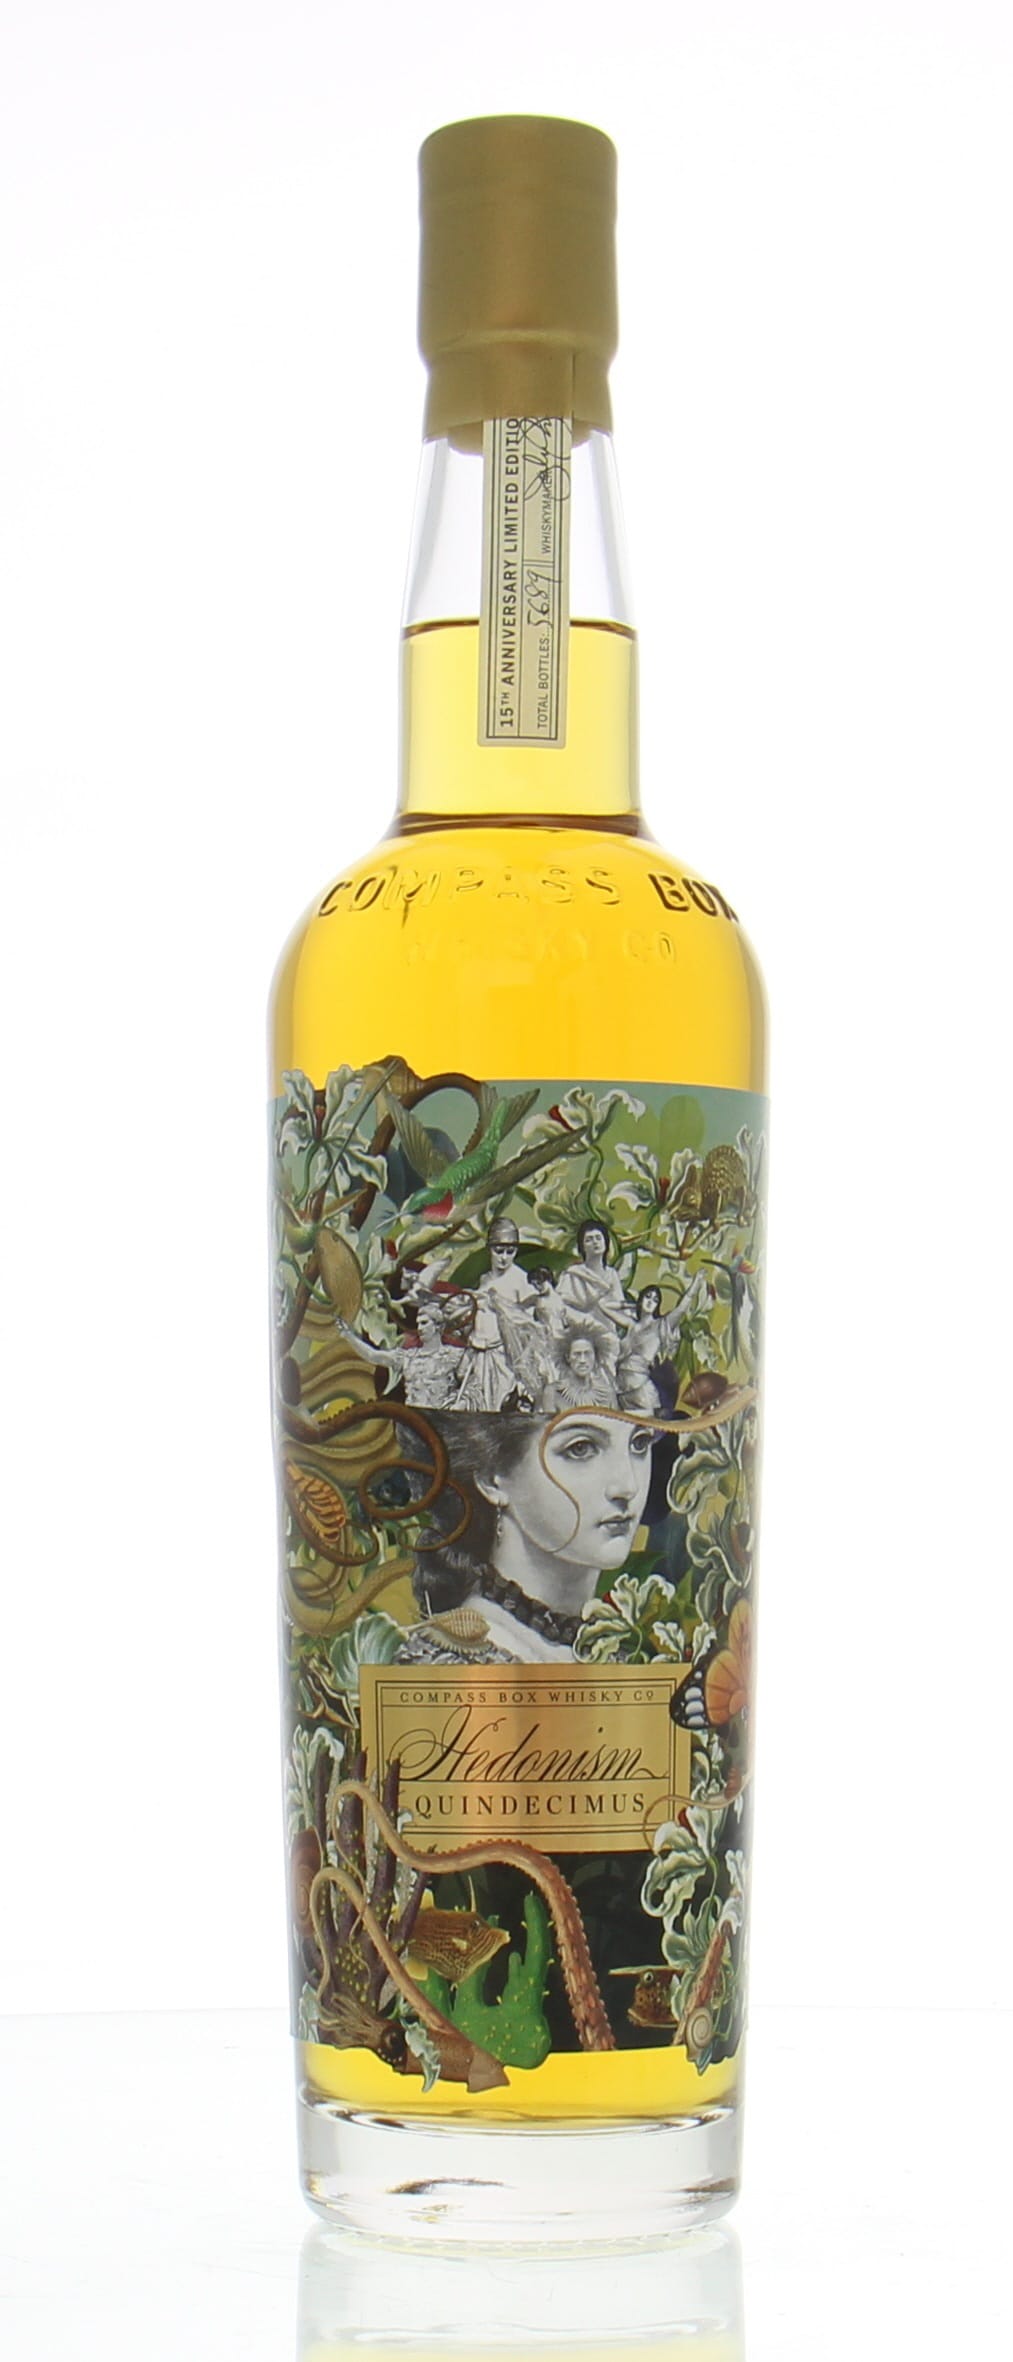 Compass Box - Hedonism Quindecimus Blended Grain 46% NV In Original Container